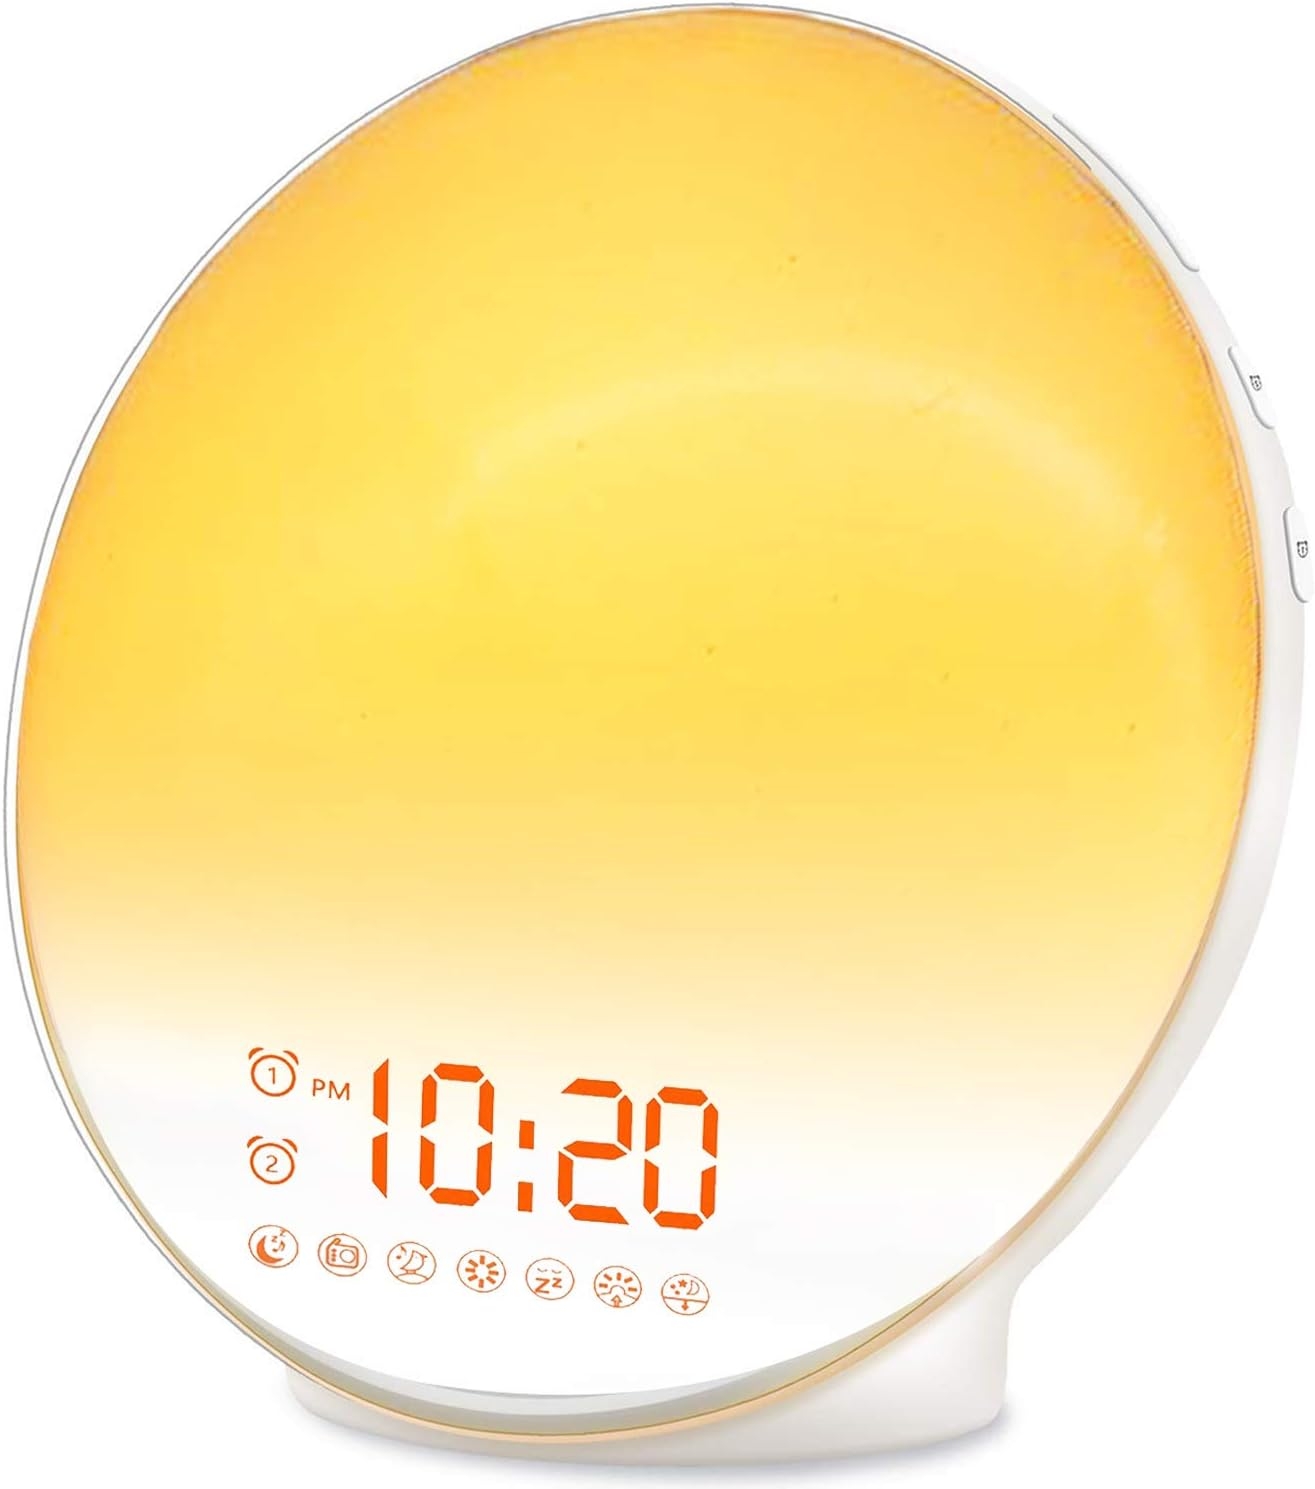 Wake Up Light Sunrise Alarm Clock for Kids, Heavy Sleepers, Bedroom, with Sunrise Simulation, Sleep Aid, Dual Alarms, FM Radio, Snooze, Nightlight, Daylight, 7 Colors, 7 Natural Sounds, Ideal for Gift